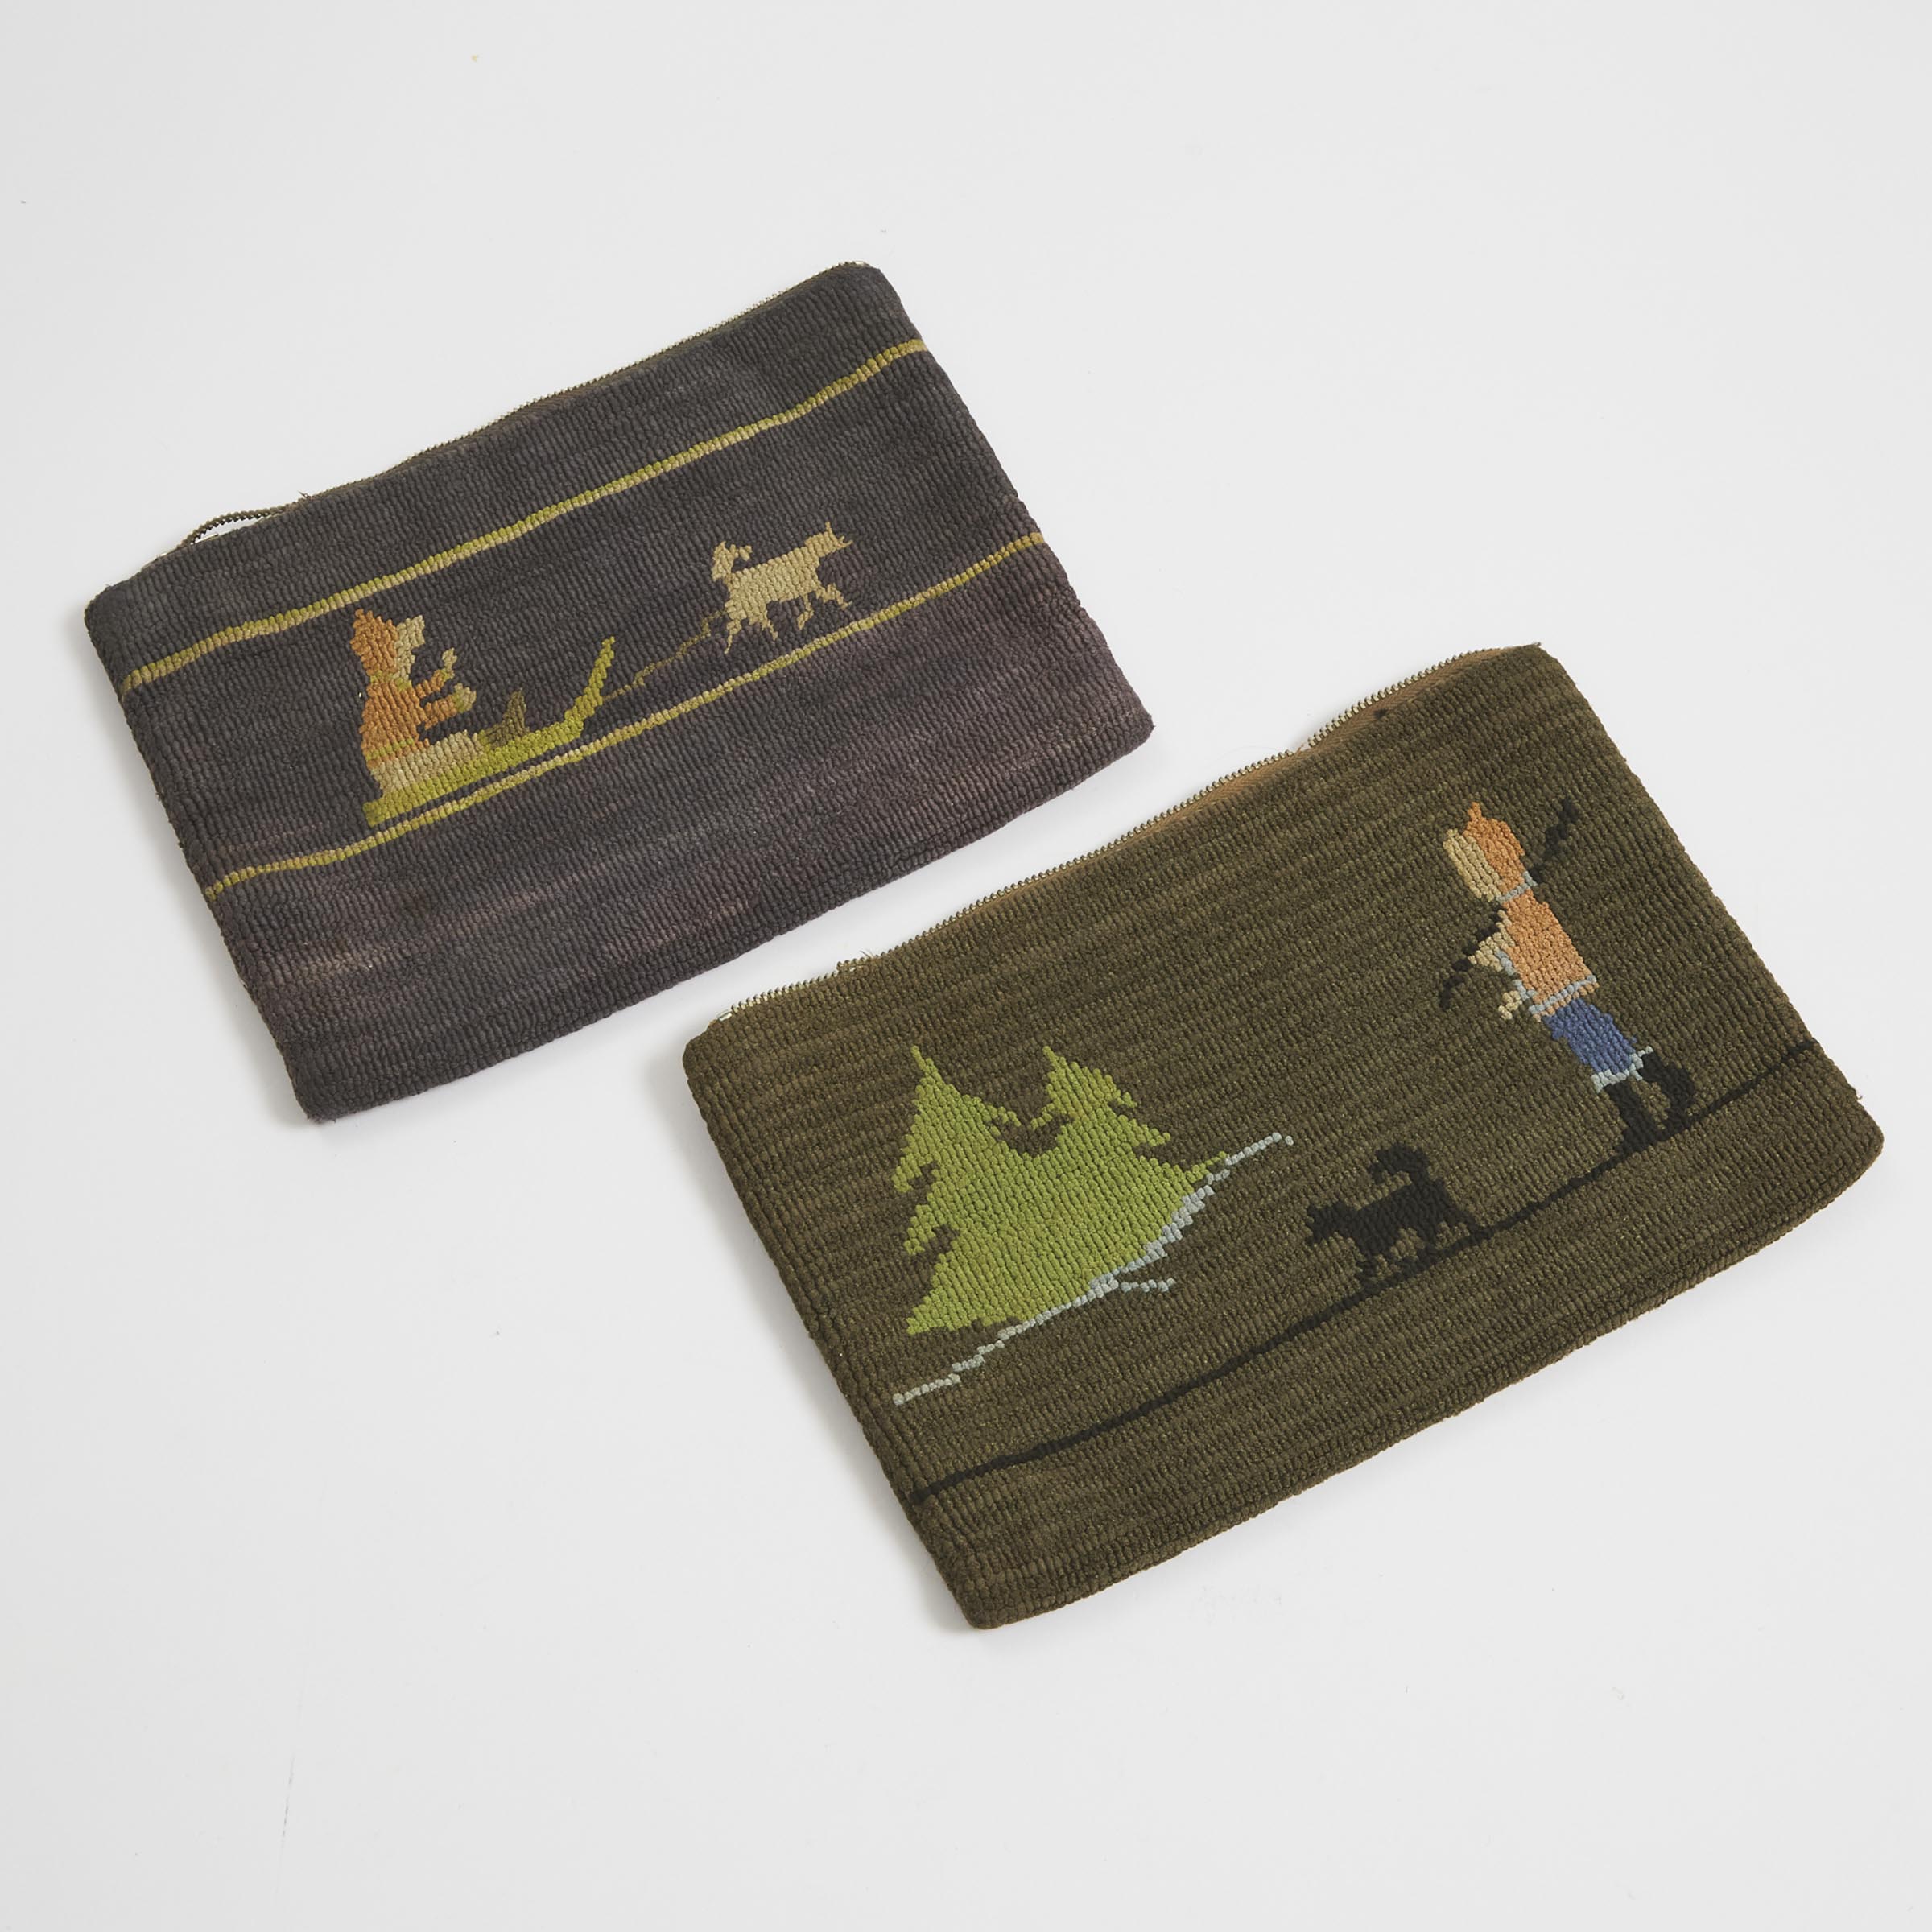 Two Grenfell Labrador Industries Pencil Cases, early-mid 20th century